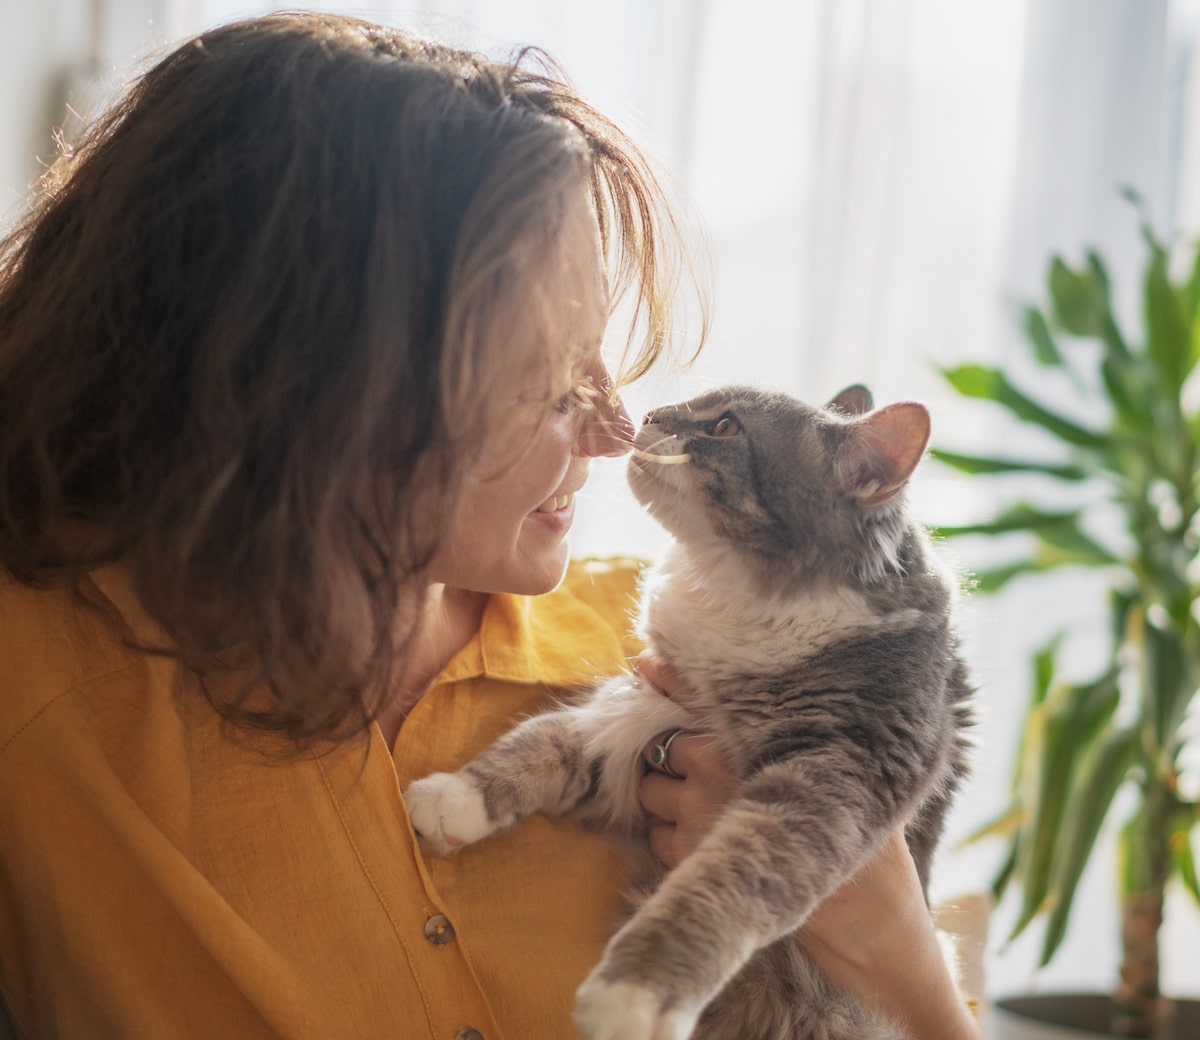 Taking care of cats comes with these 6 challenges